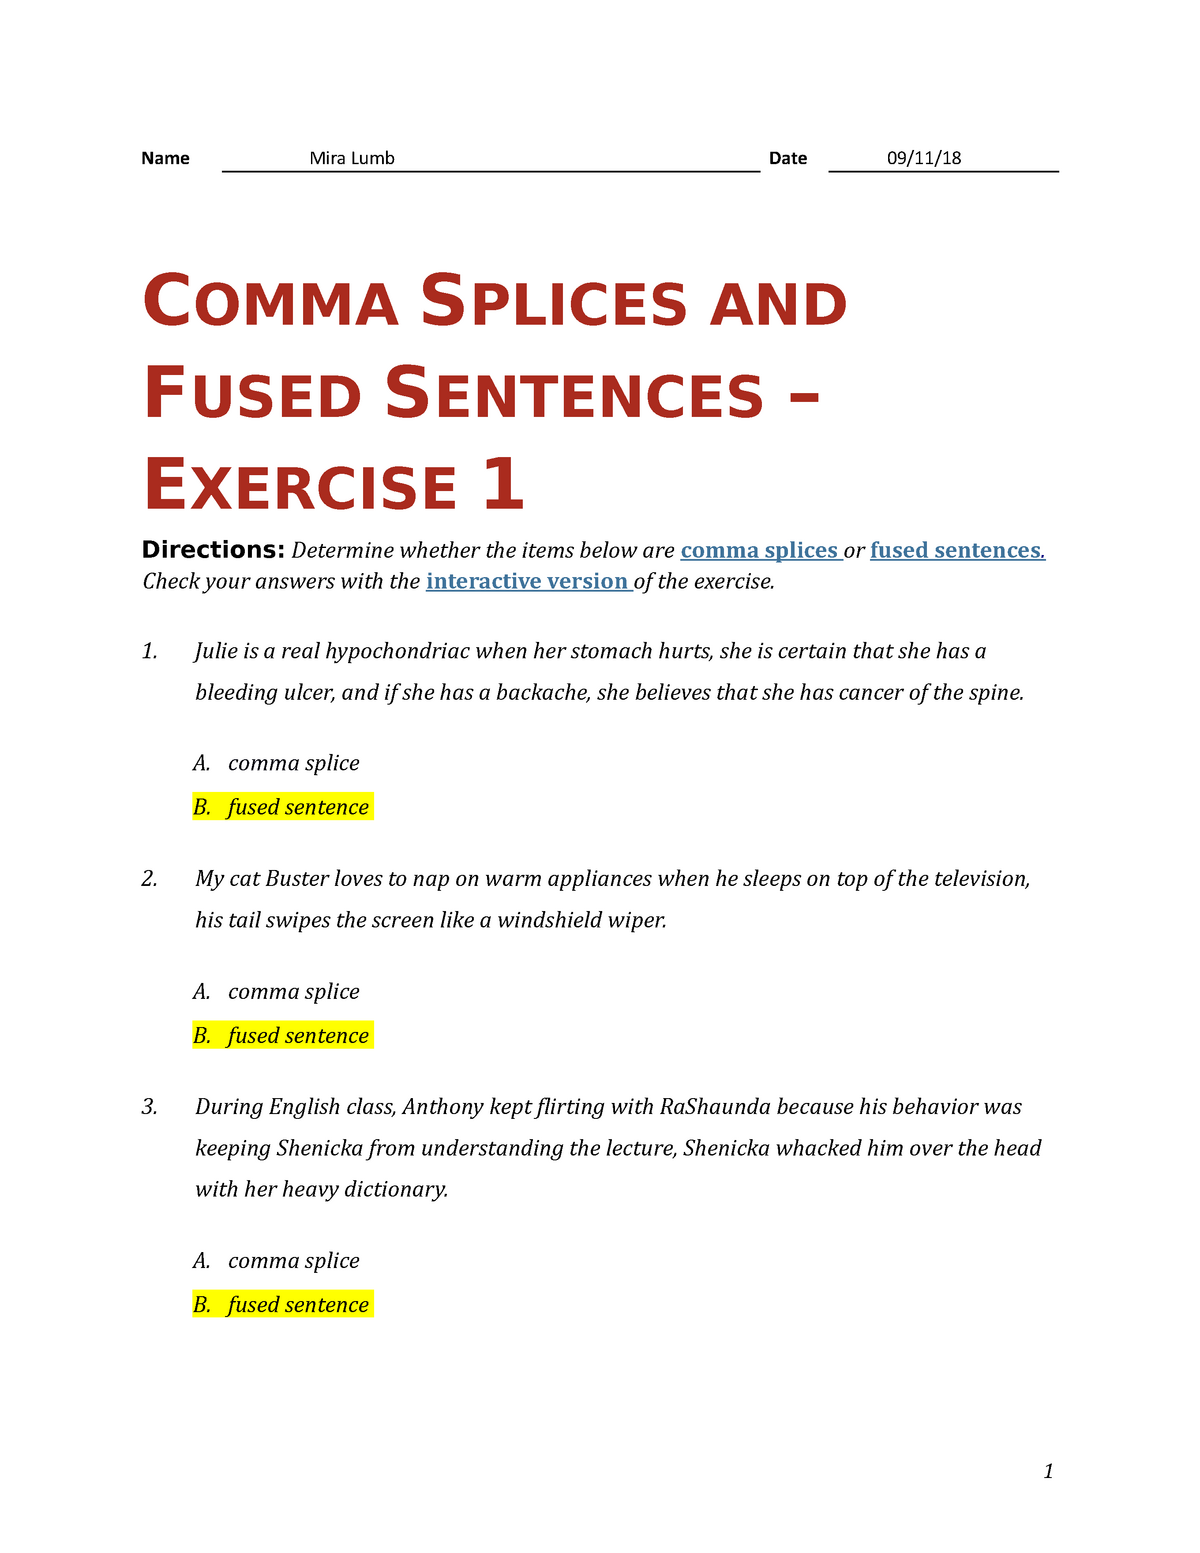 Comma Splices And Fused Sentences Name Mira Lumb Date COMMA SPLICES AND FUSED SENTENCES